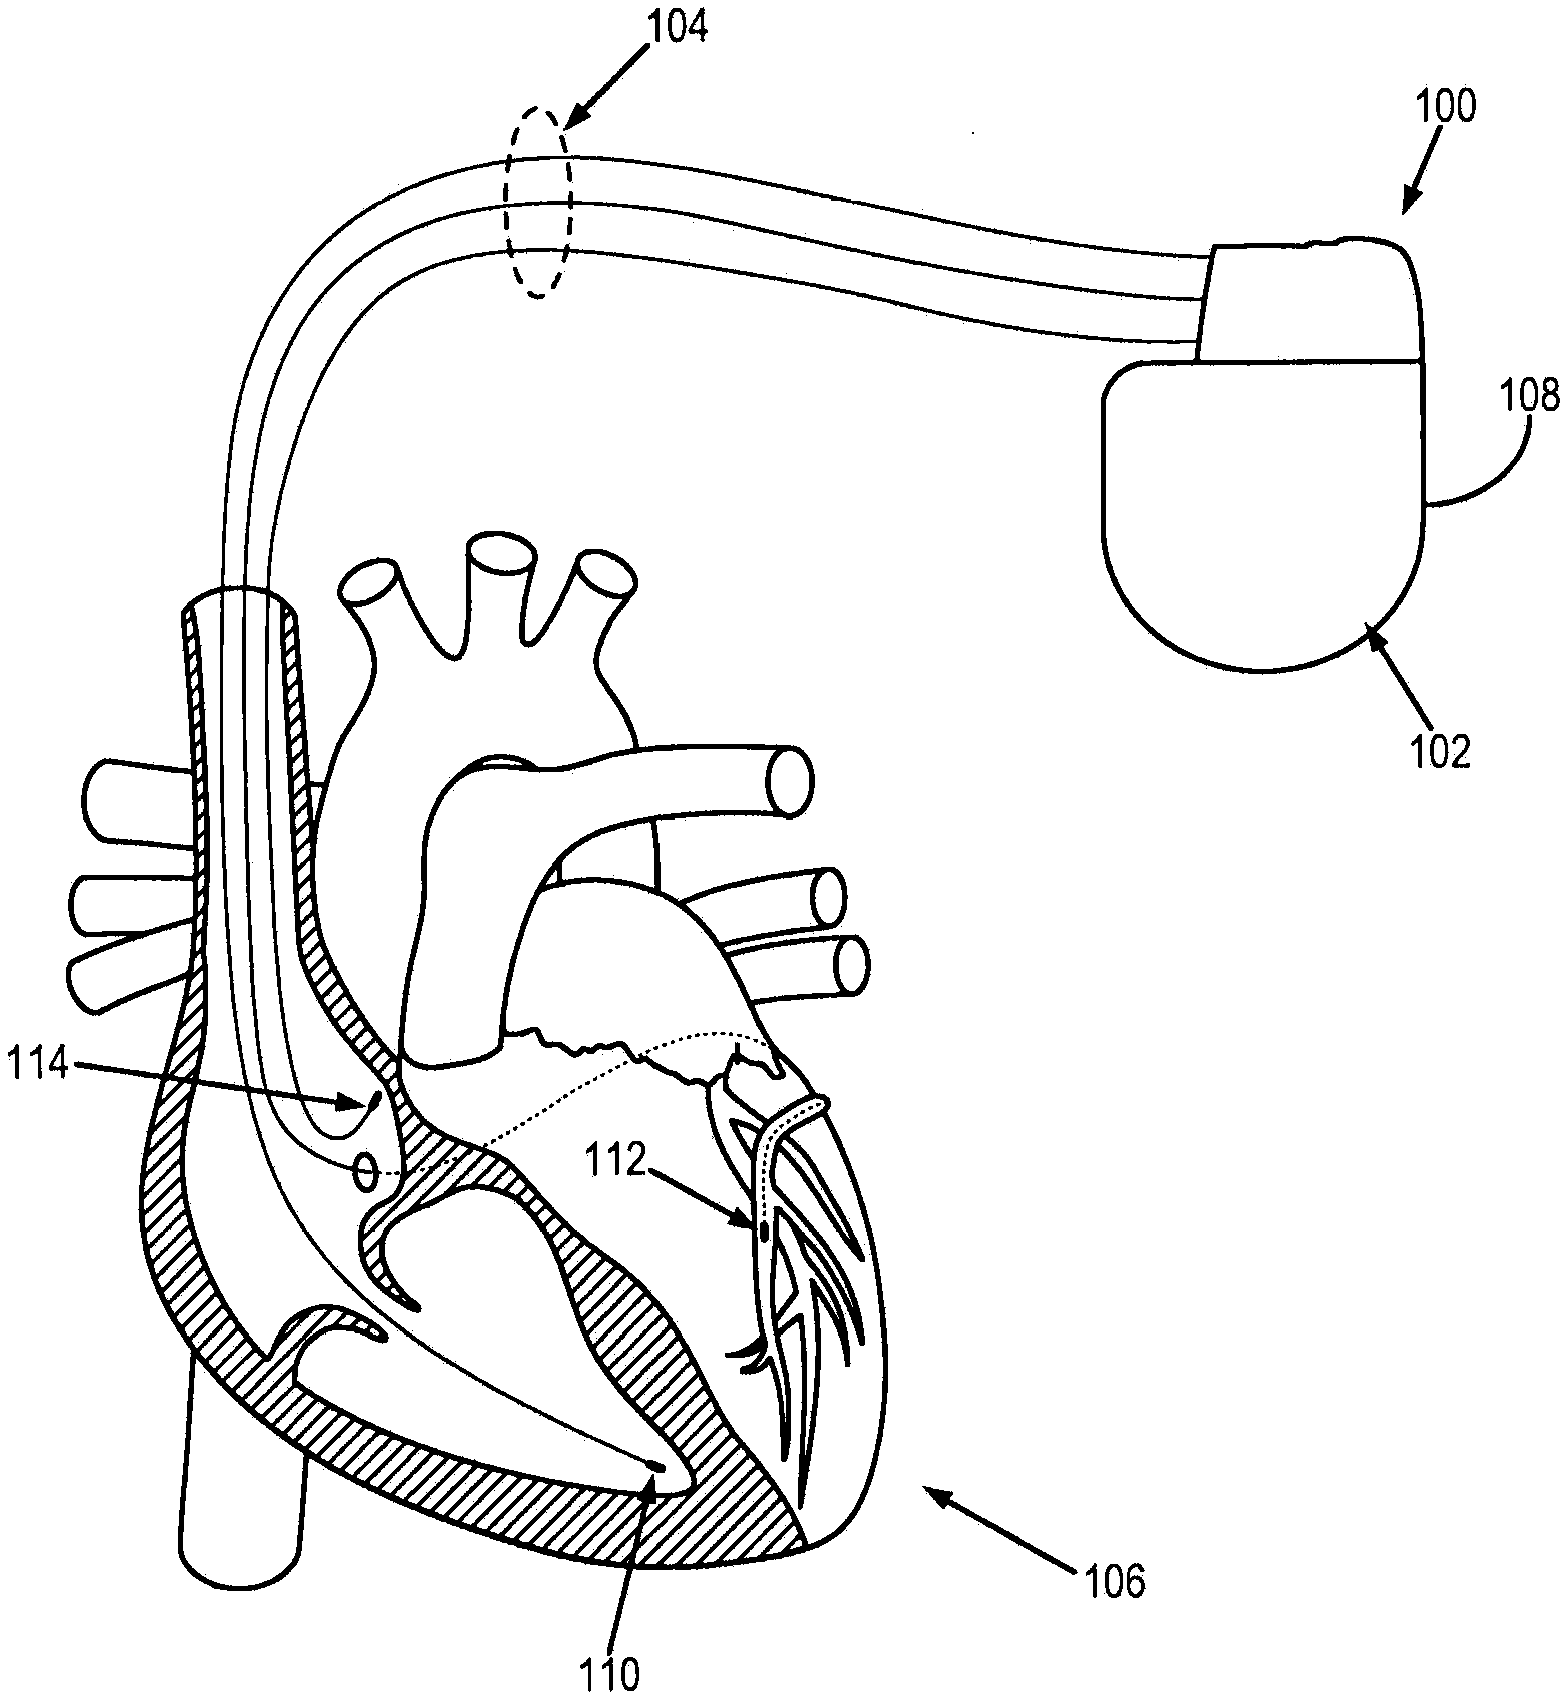 System and method for cardiac resychronization therapy control parameter generation using ventricular activation simulation and surface ECG registration